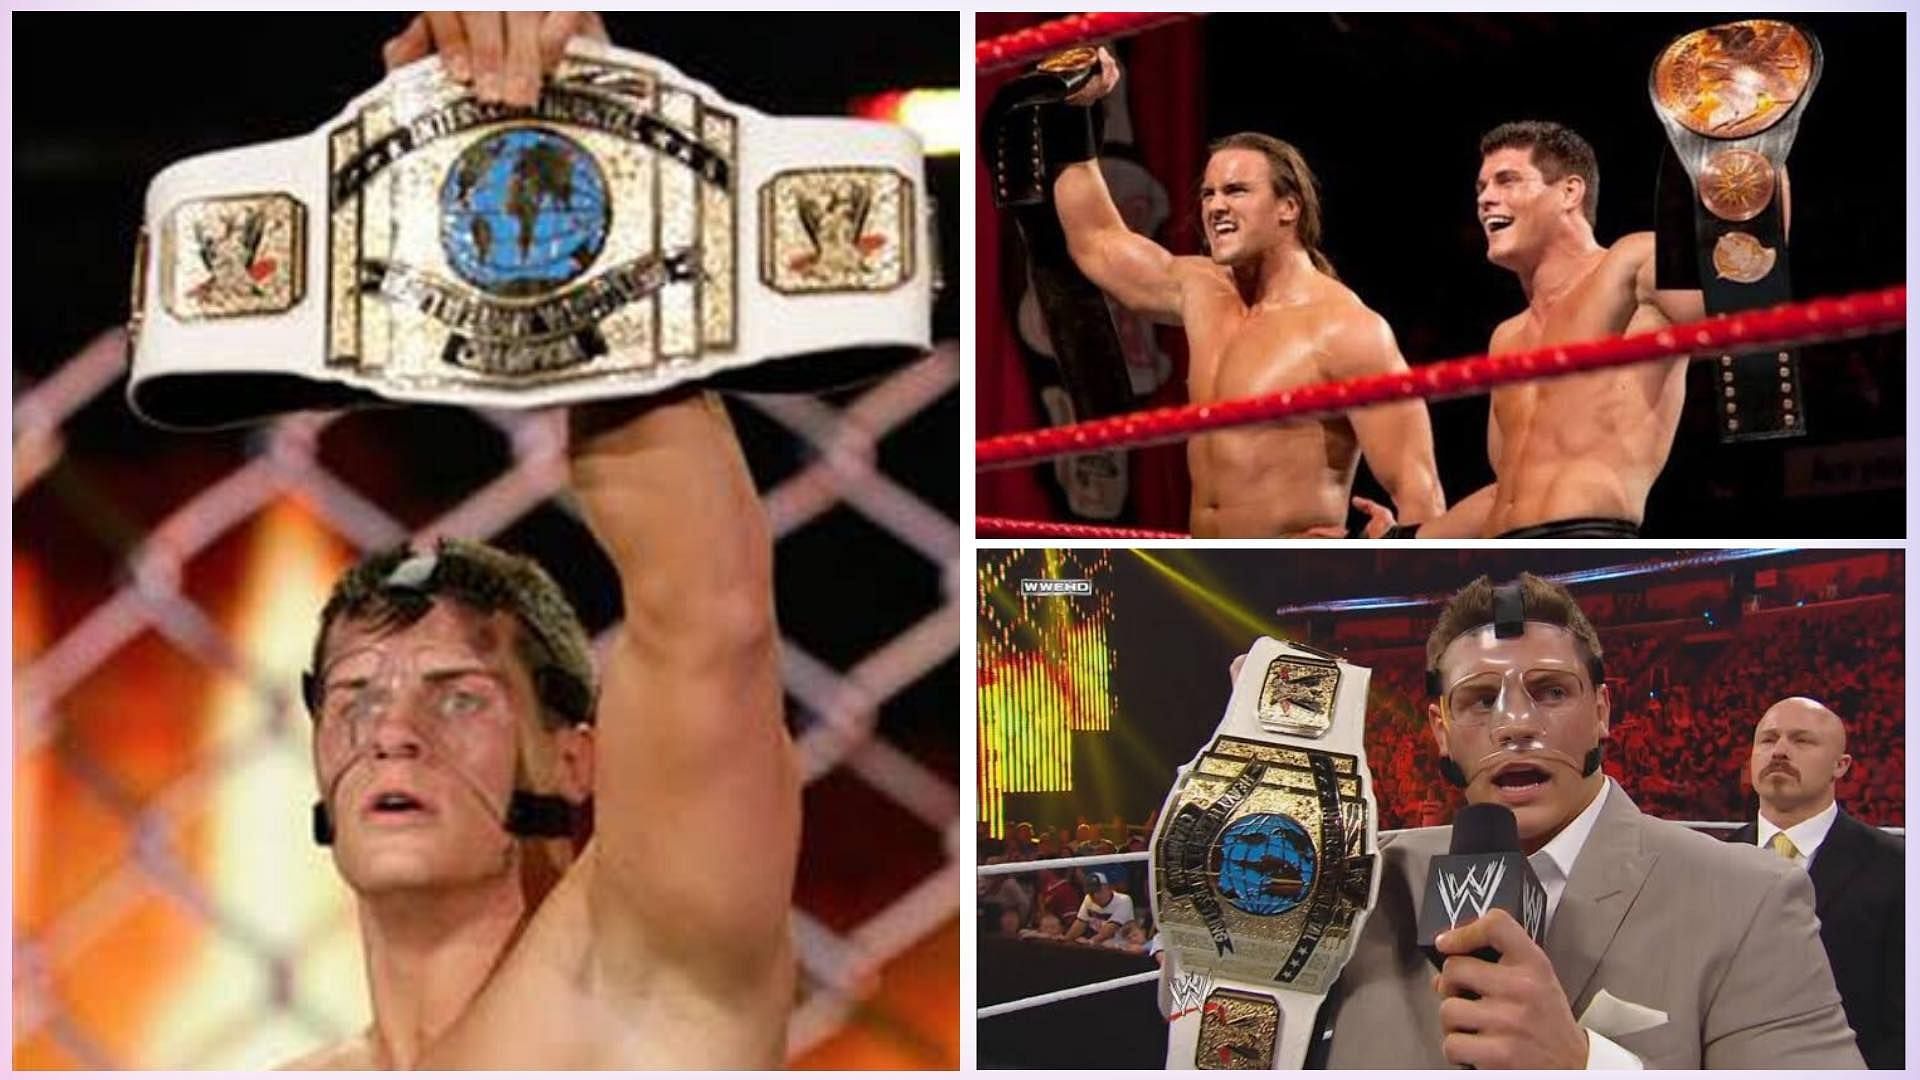 WWE Superstar Cody Rhodes and the modified version of the classic Intercontinental Championship